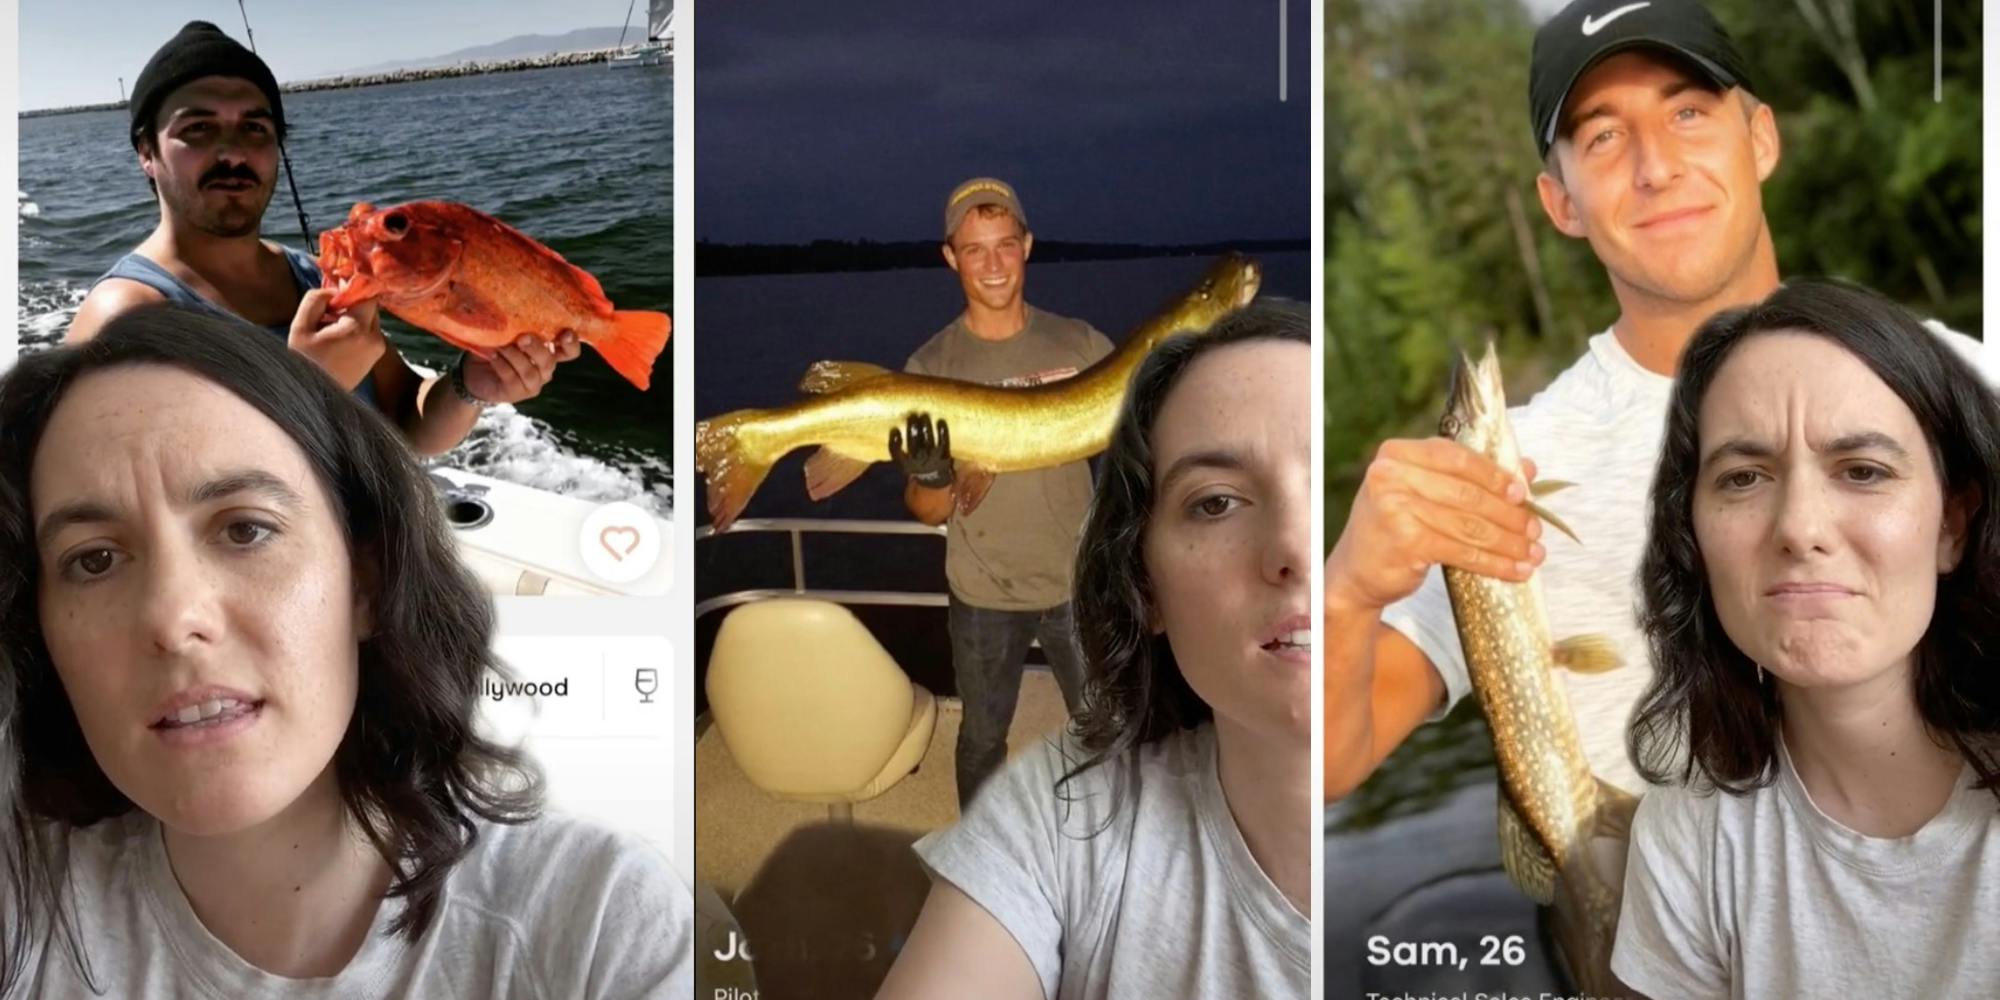 Meet the TikTok User Who Rates the Fish in Men's Tinder Profiles